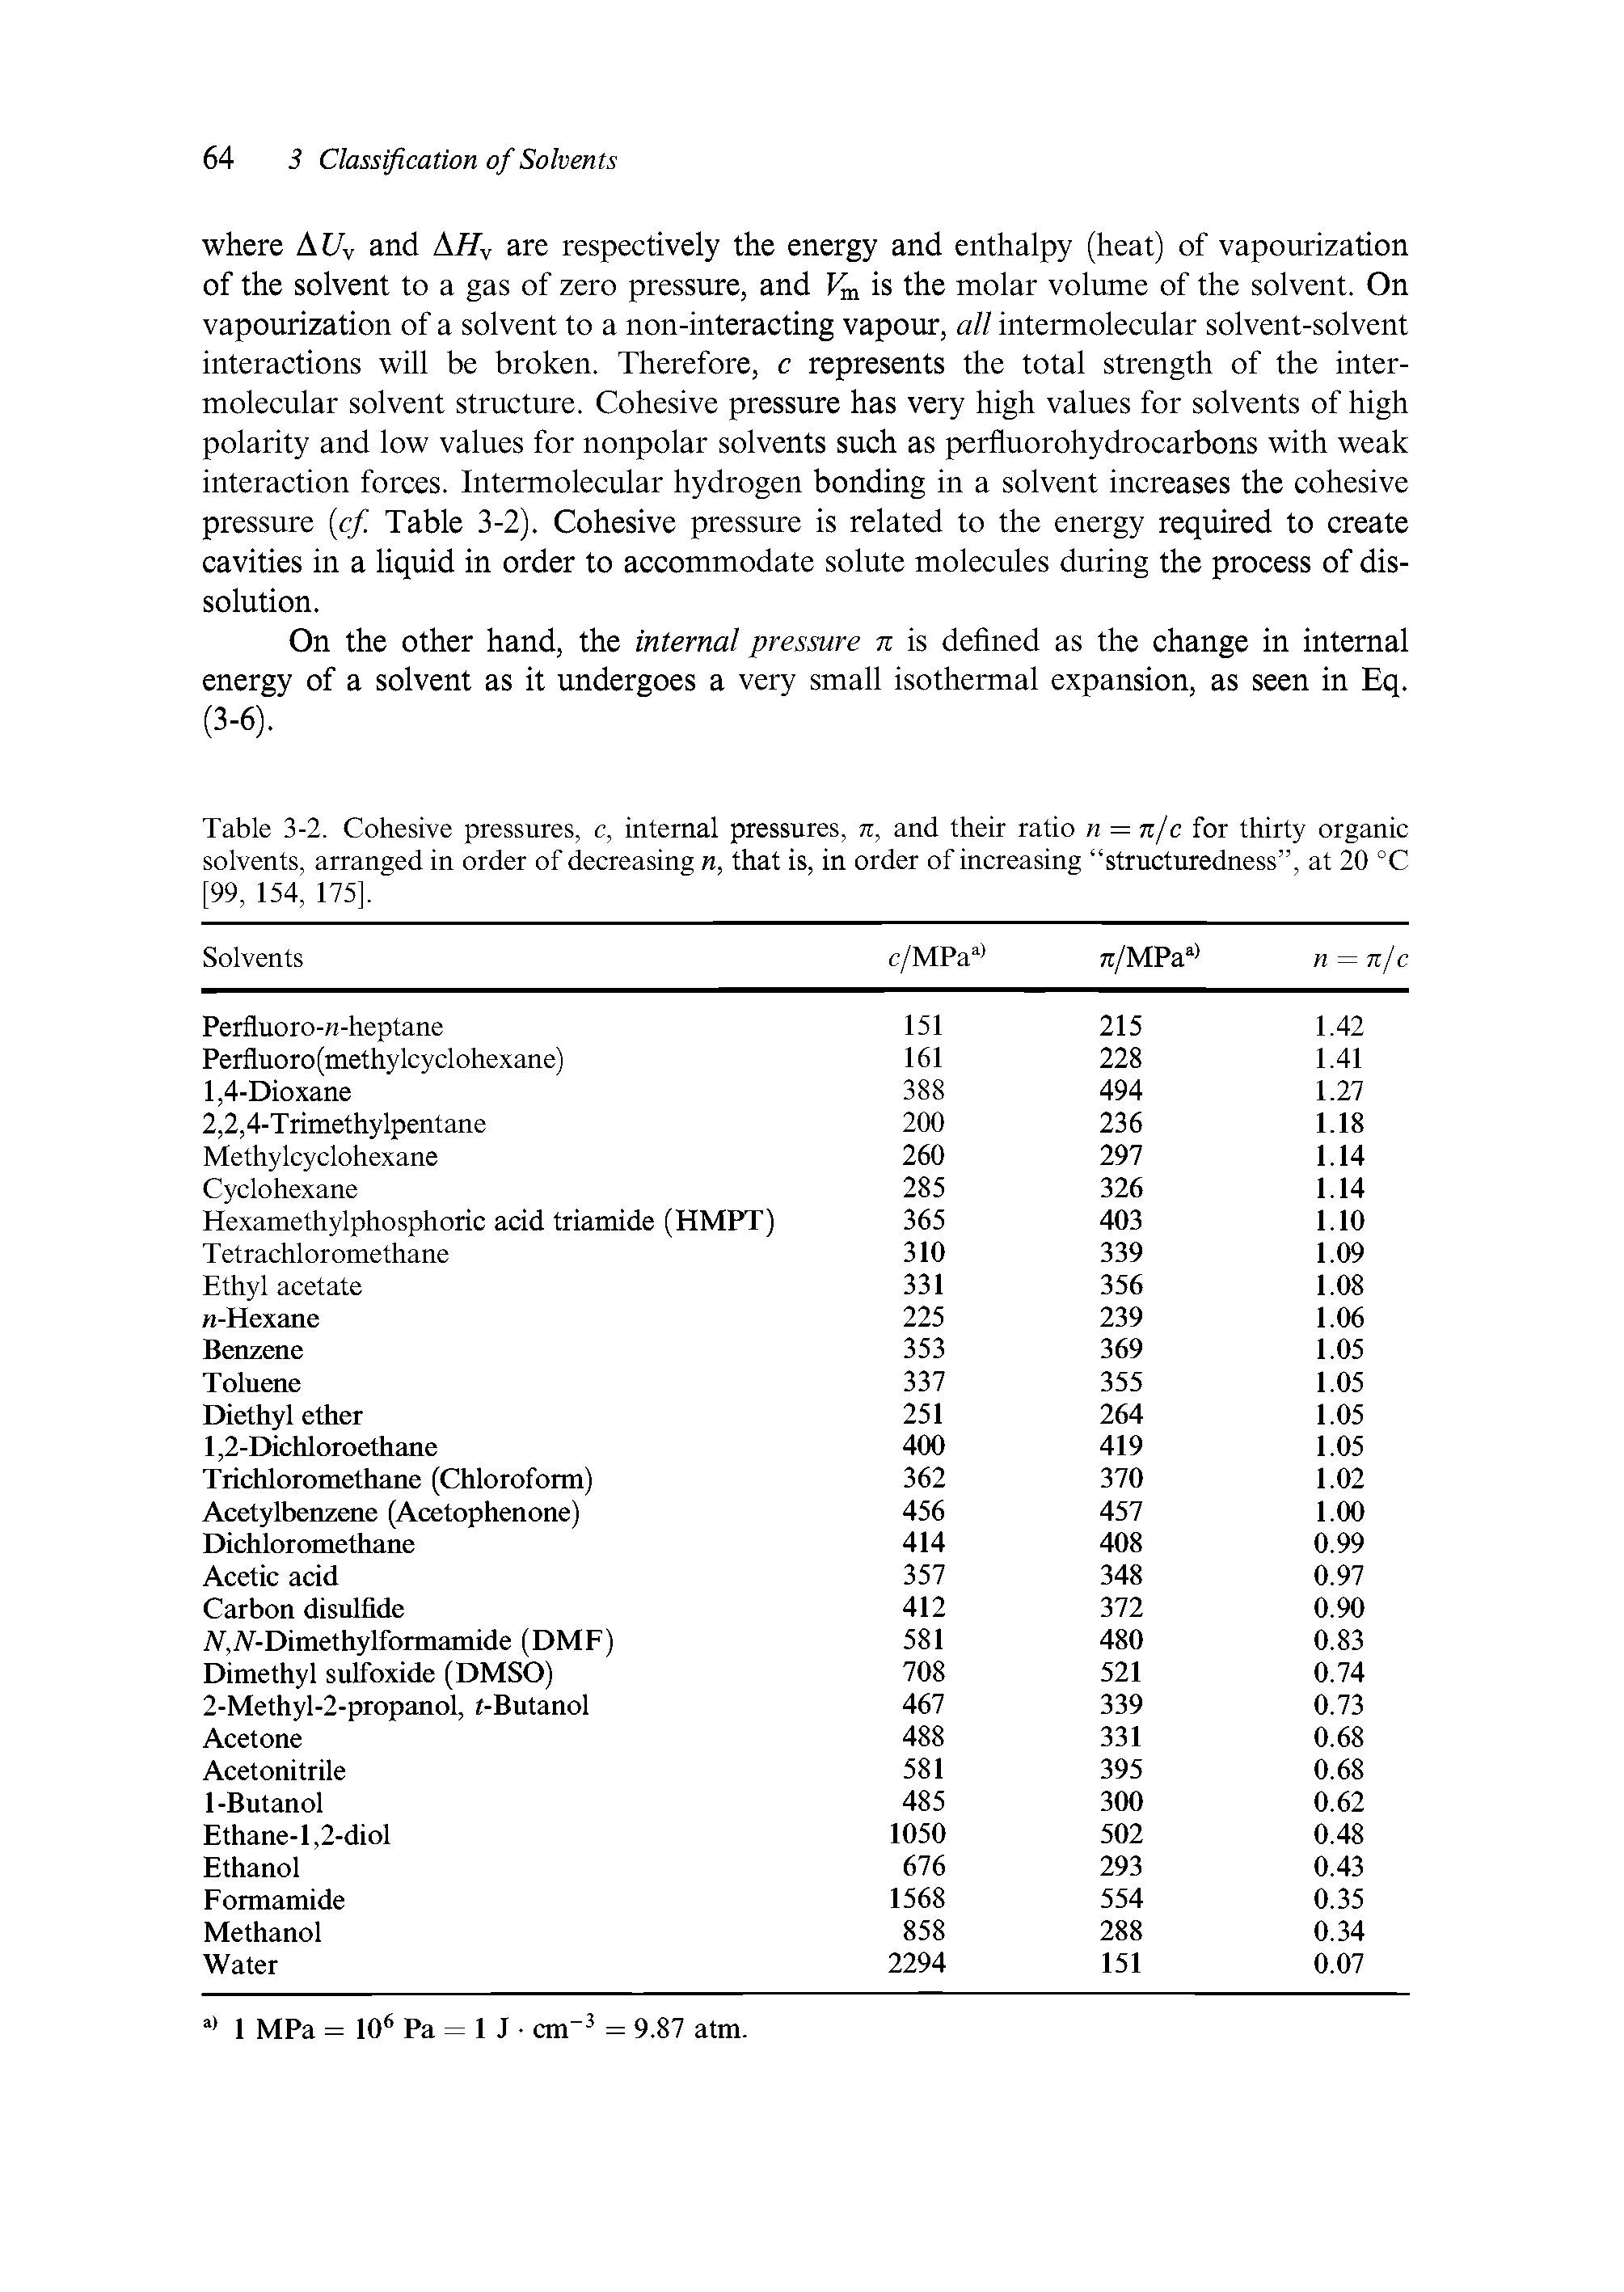 Table 3-2. Cohesive pressures, c, internal pressures, k, and their ratio n = njc for thirty organic solvents, arranged in order of decreasing n, that is, in order of increasing structuredness , at 20 °C [99, 154, 175].